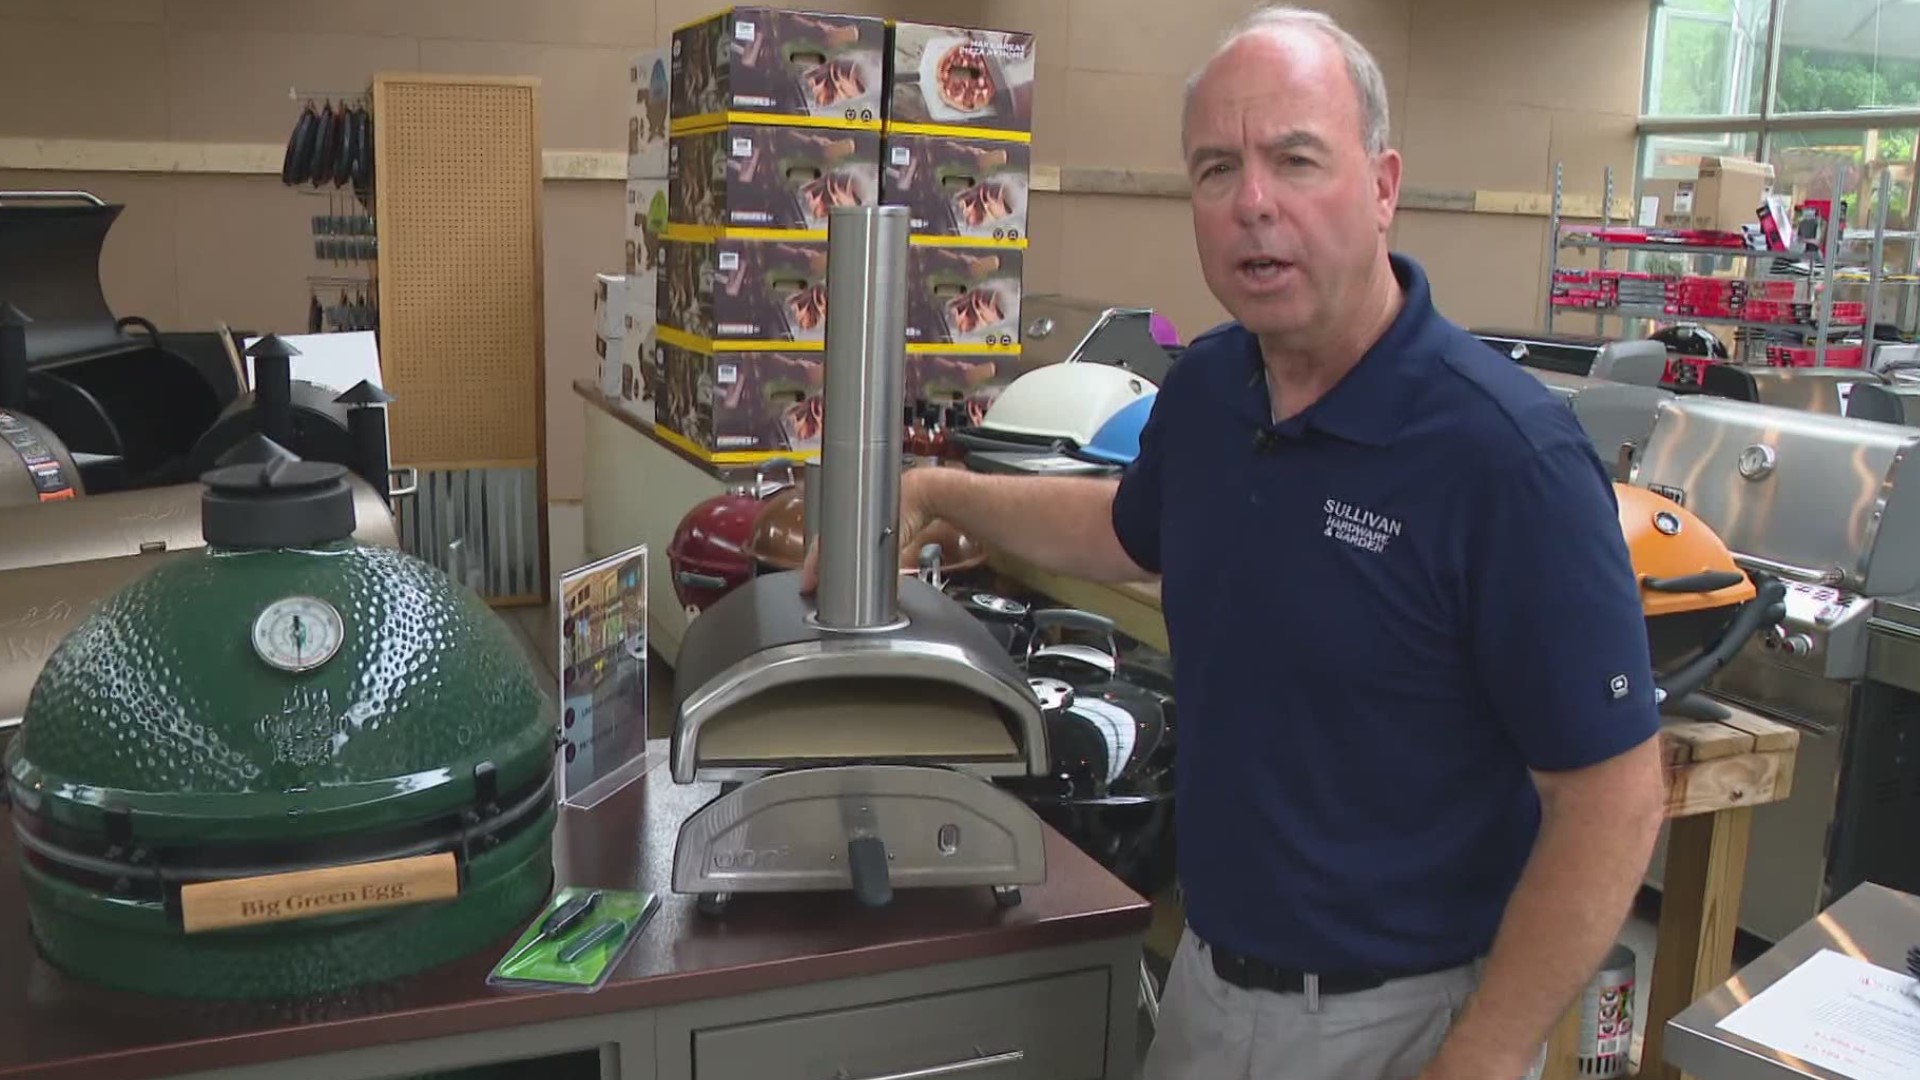 Next Sunday is Father's Day and Pat Sullivan helps you find the right gift for dad.